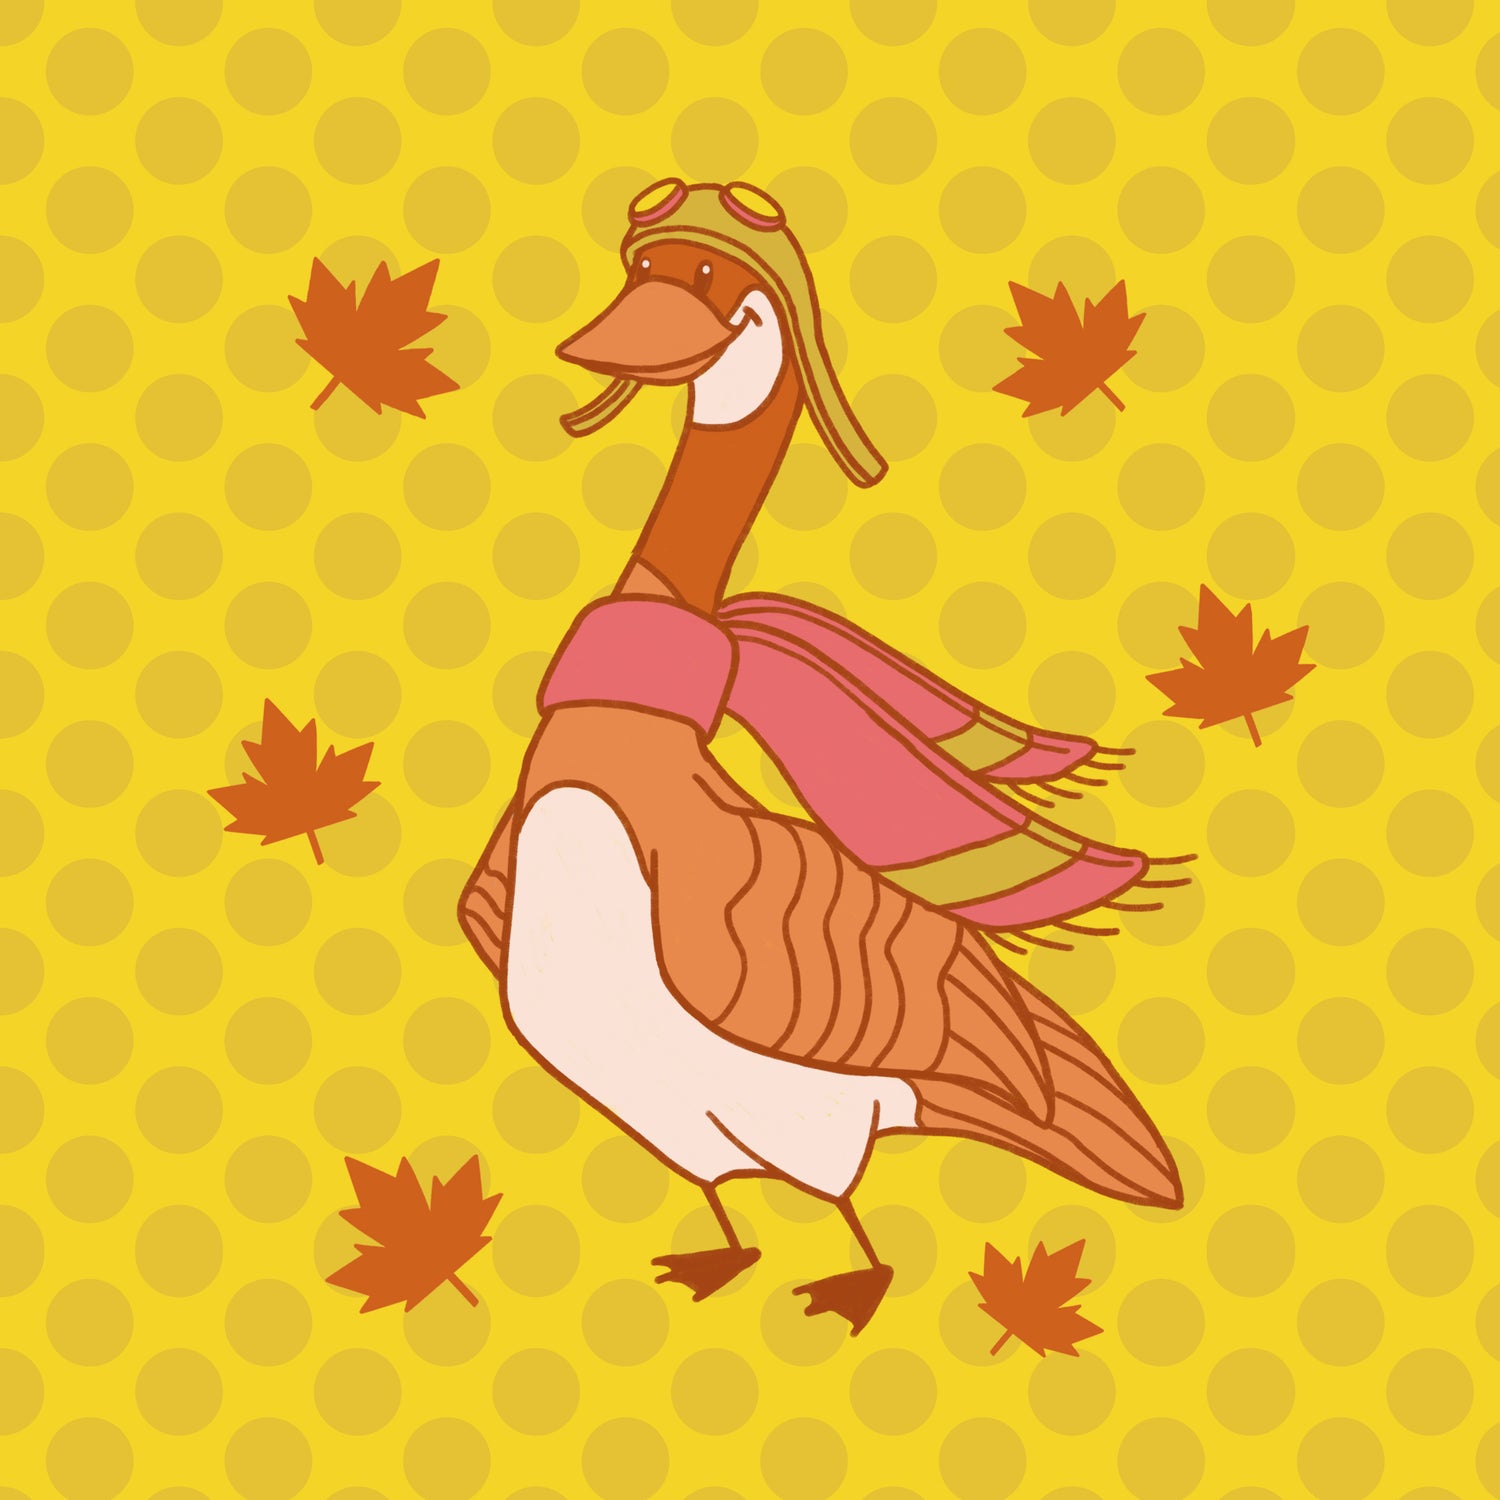 A Canada goose is dressed in pilot headgear and a scarf. It is surrounded by maple leaves and is on a yellow polka dot background.